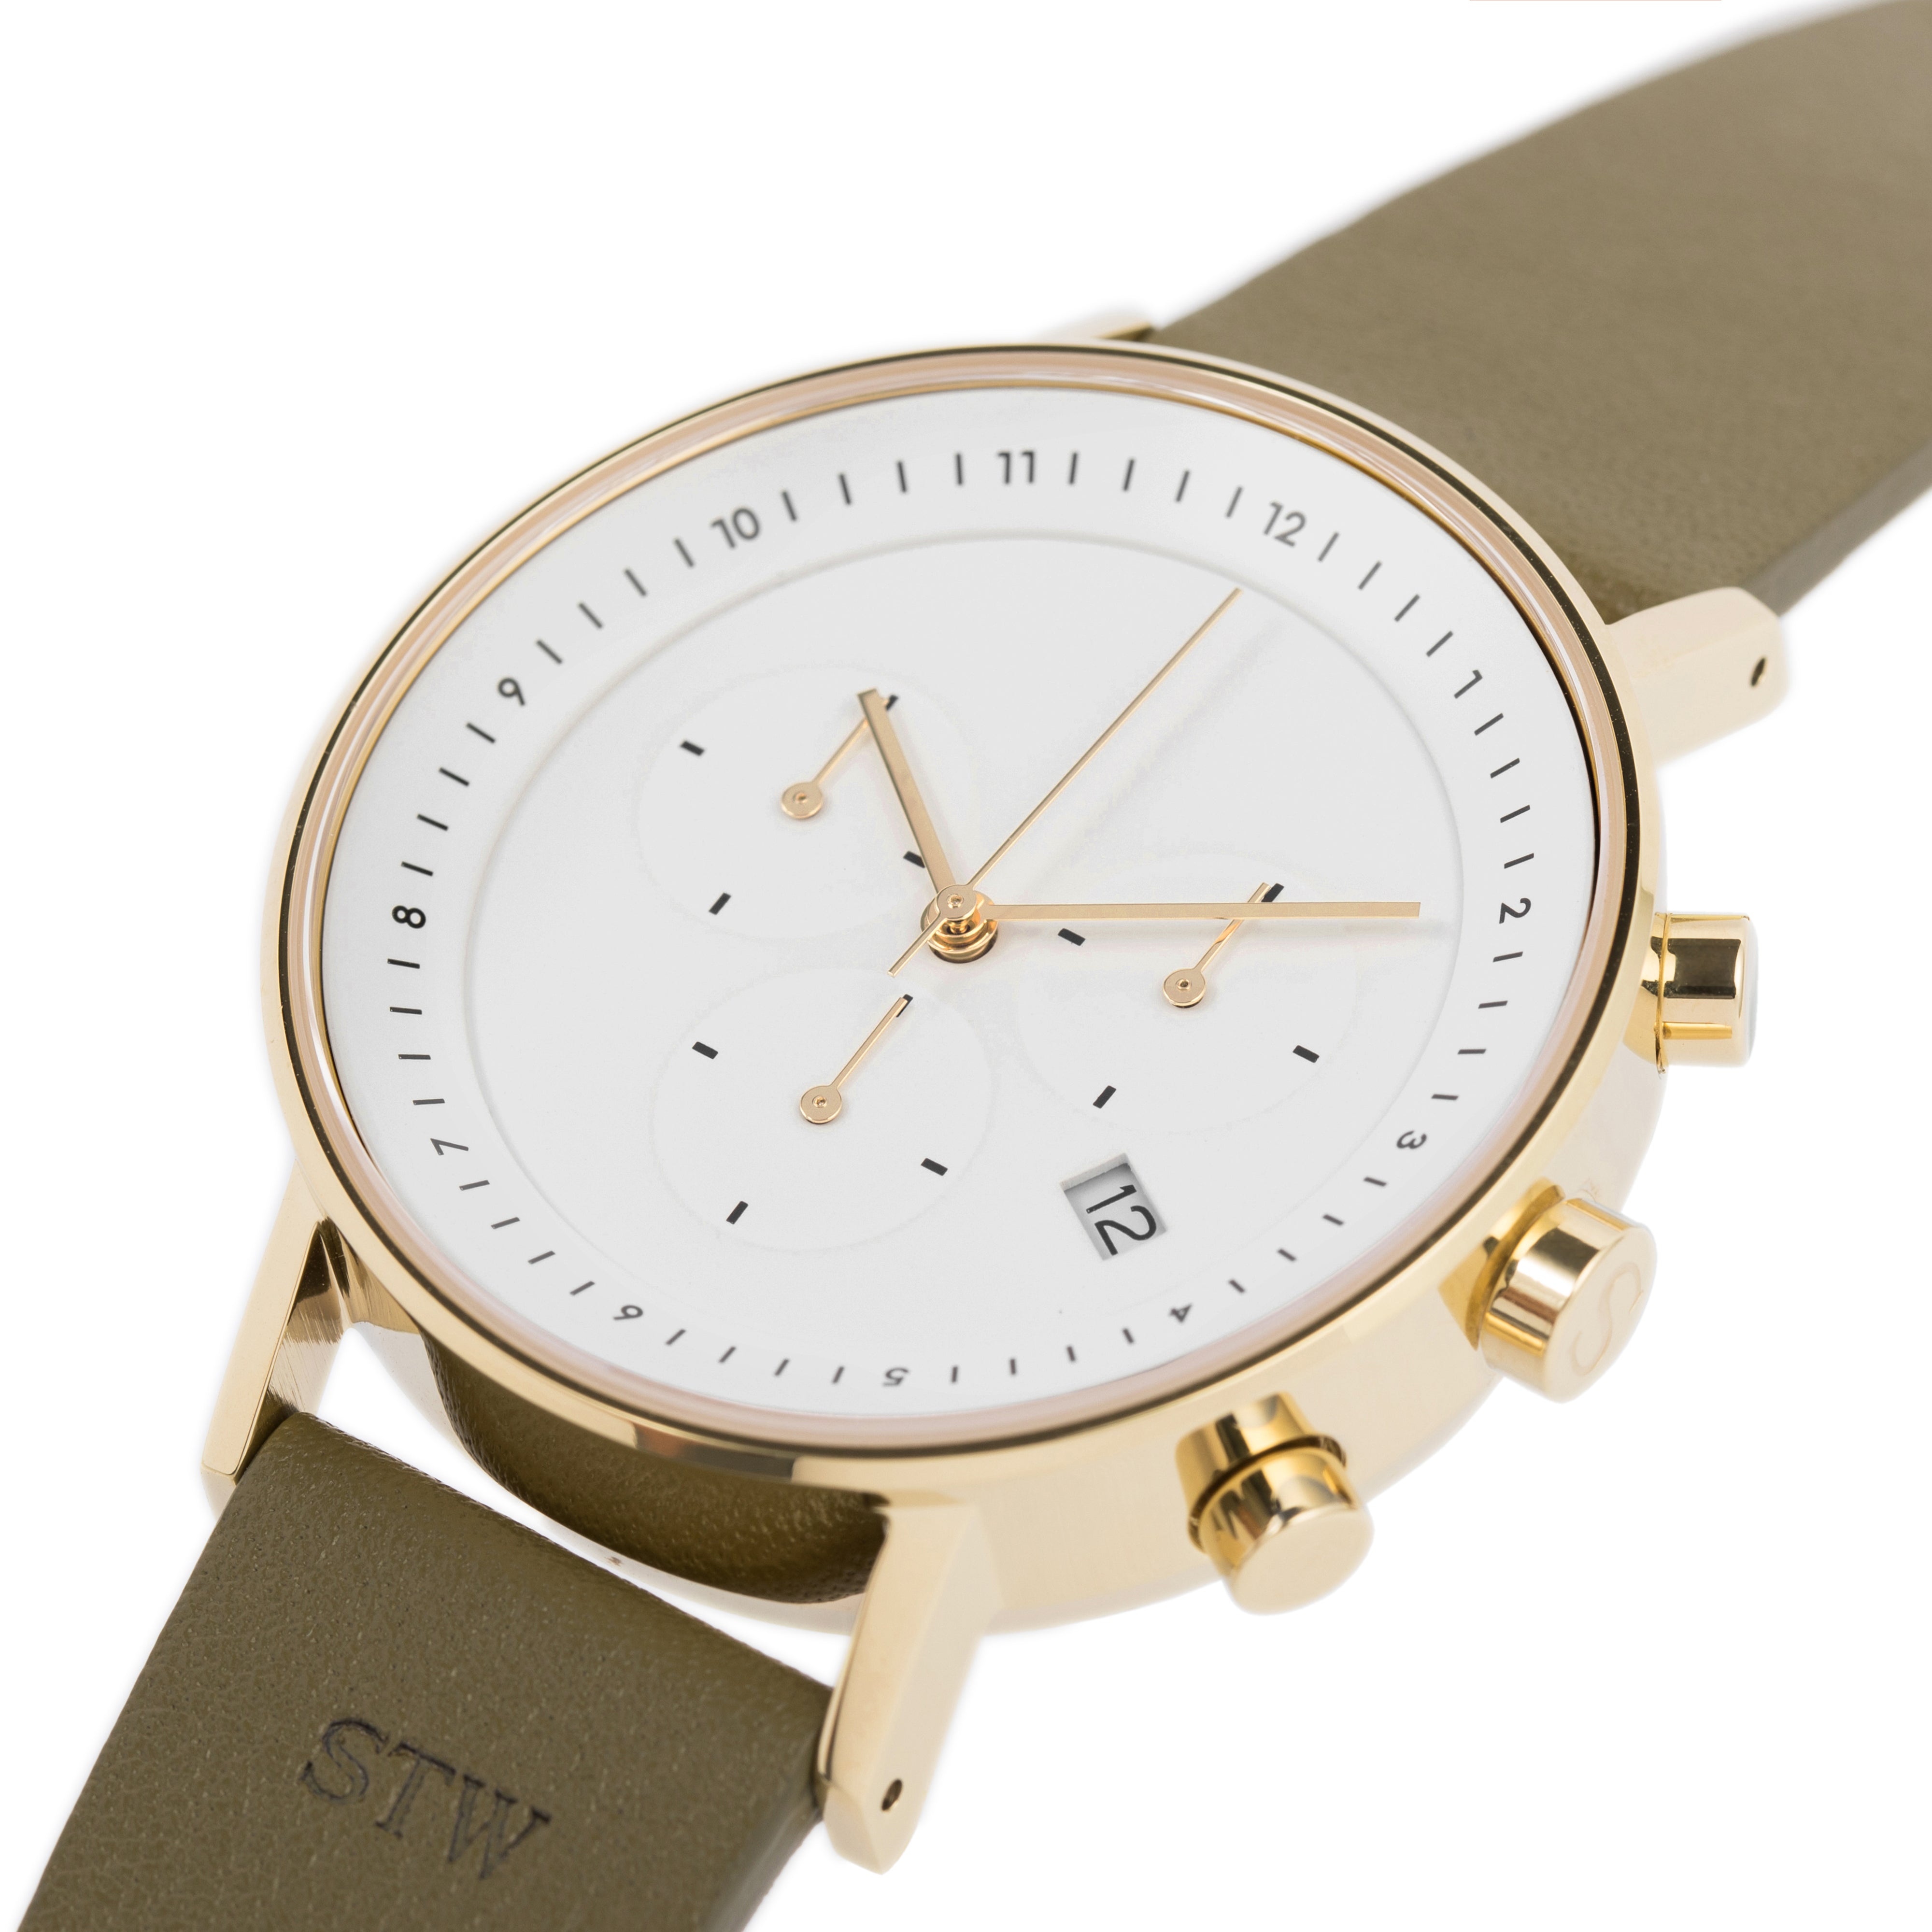 THE CHRONO -  WHITE DIAL / OLIVE LEATHER STRAP WATCH